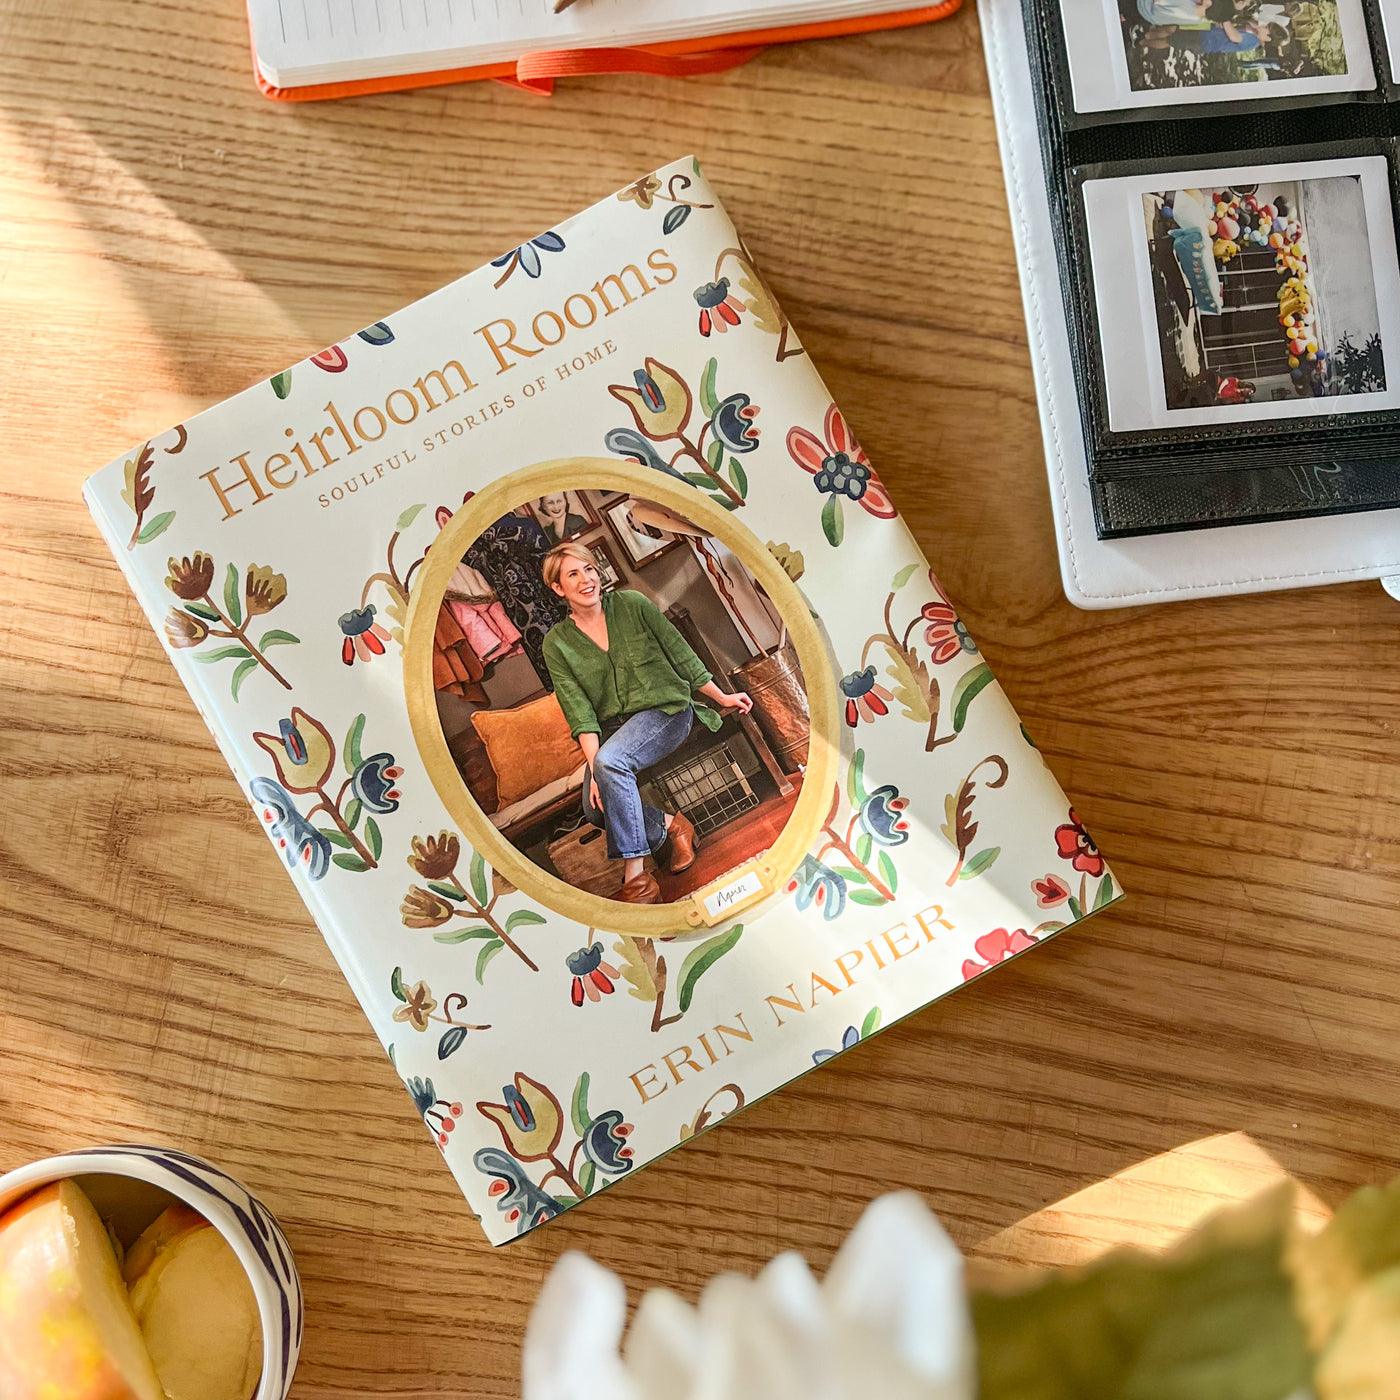 Heirloom Rooms: Soulful Stories of Home by Erin Napier